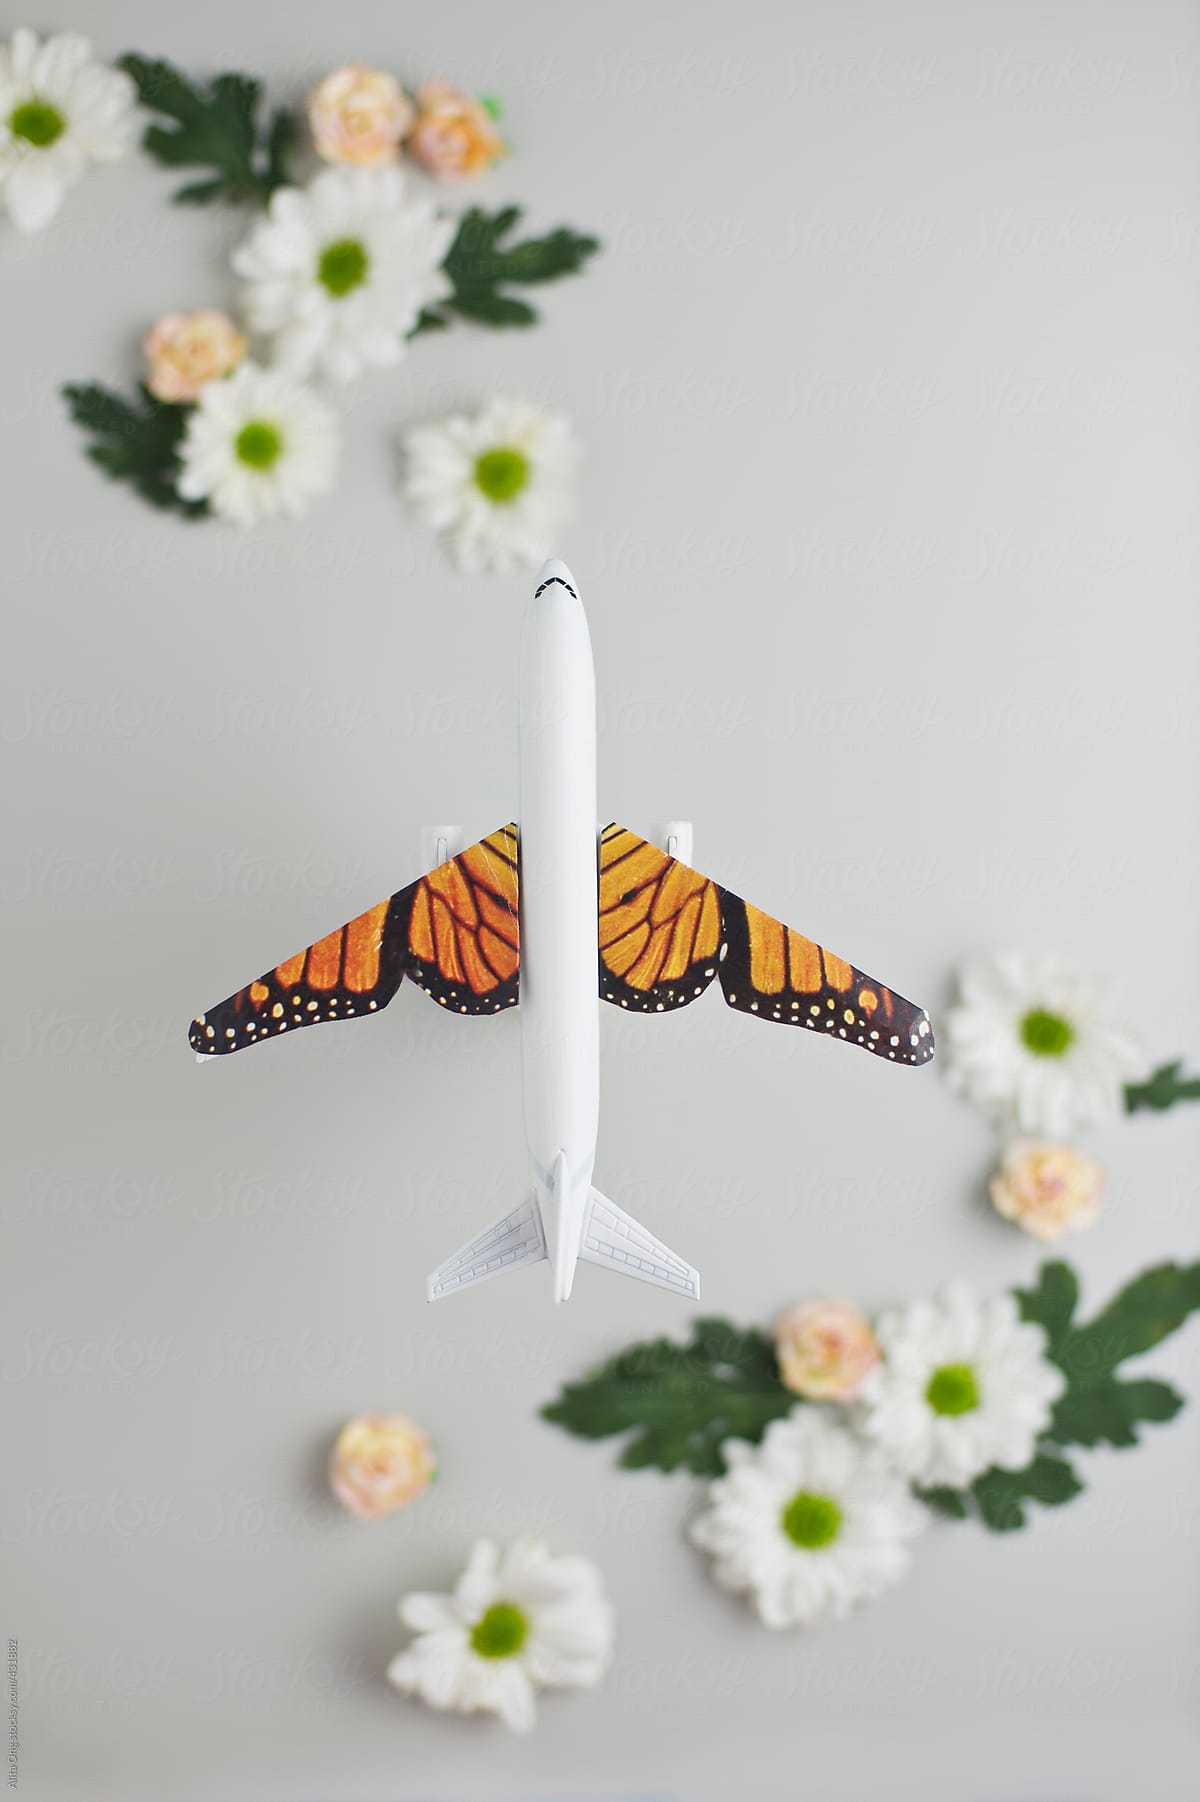 Flight with butterfly wings flying over flowers